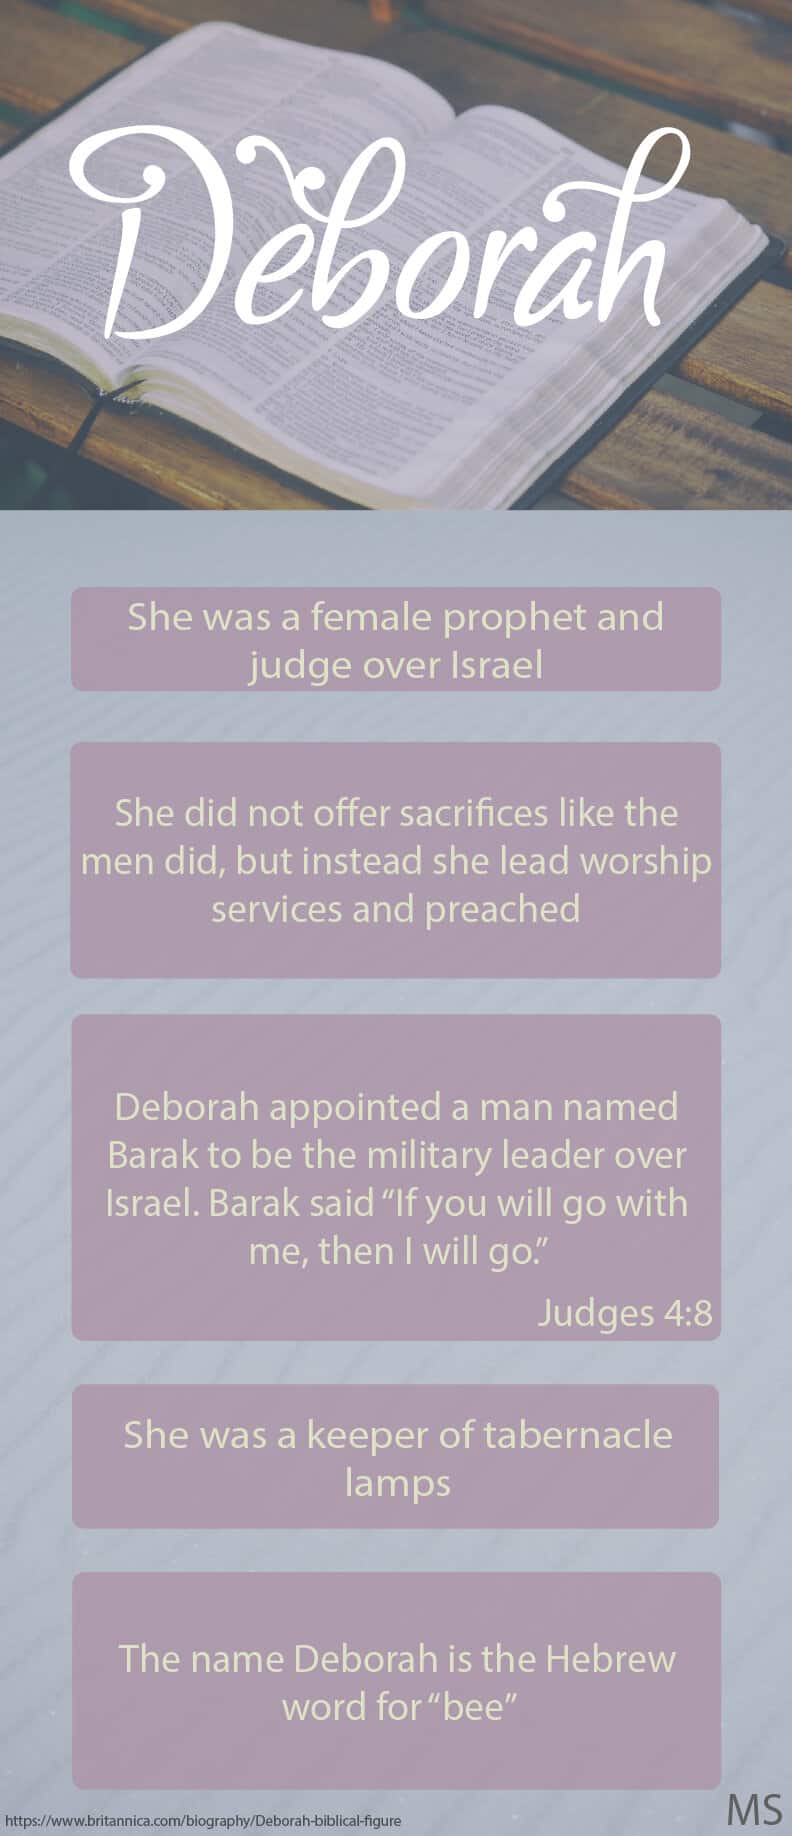 Deborah can be found in Judges 4 and 5. Deborah was not only considered a prophet, but was also one of the first female judges in Israel.